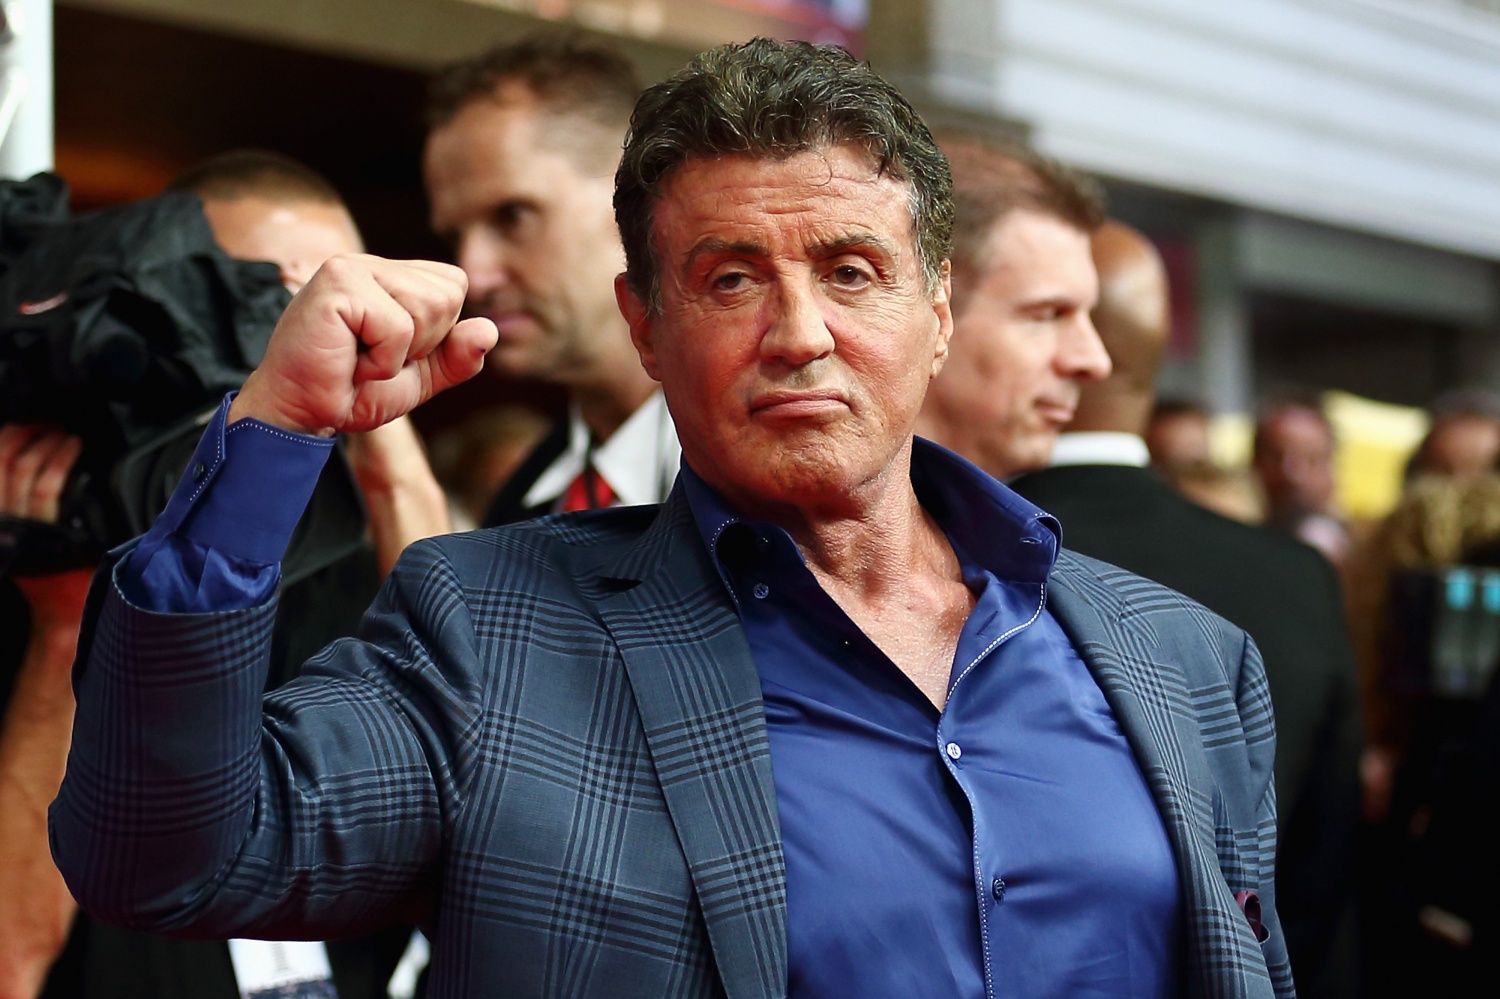 Sylvester Stallone attends the premiere of The Expendables 3 in Germany, 2014